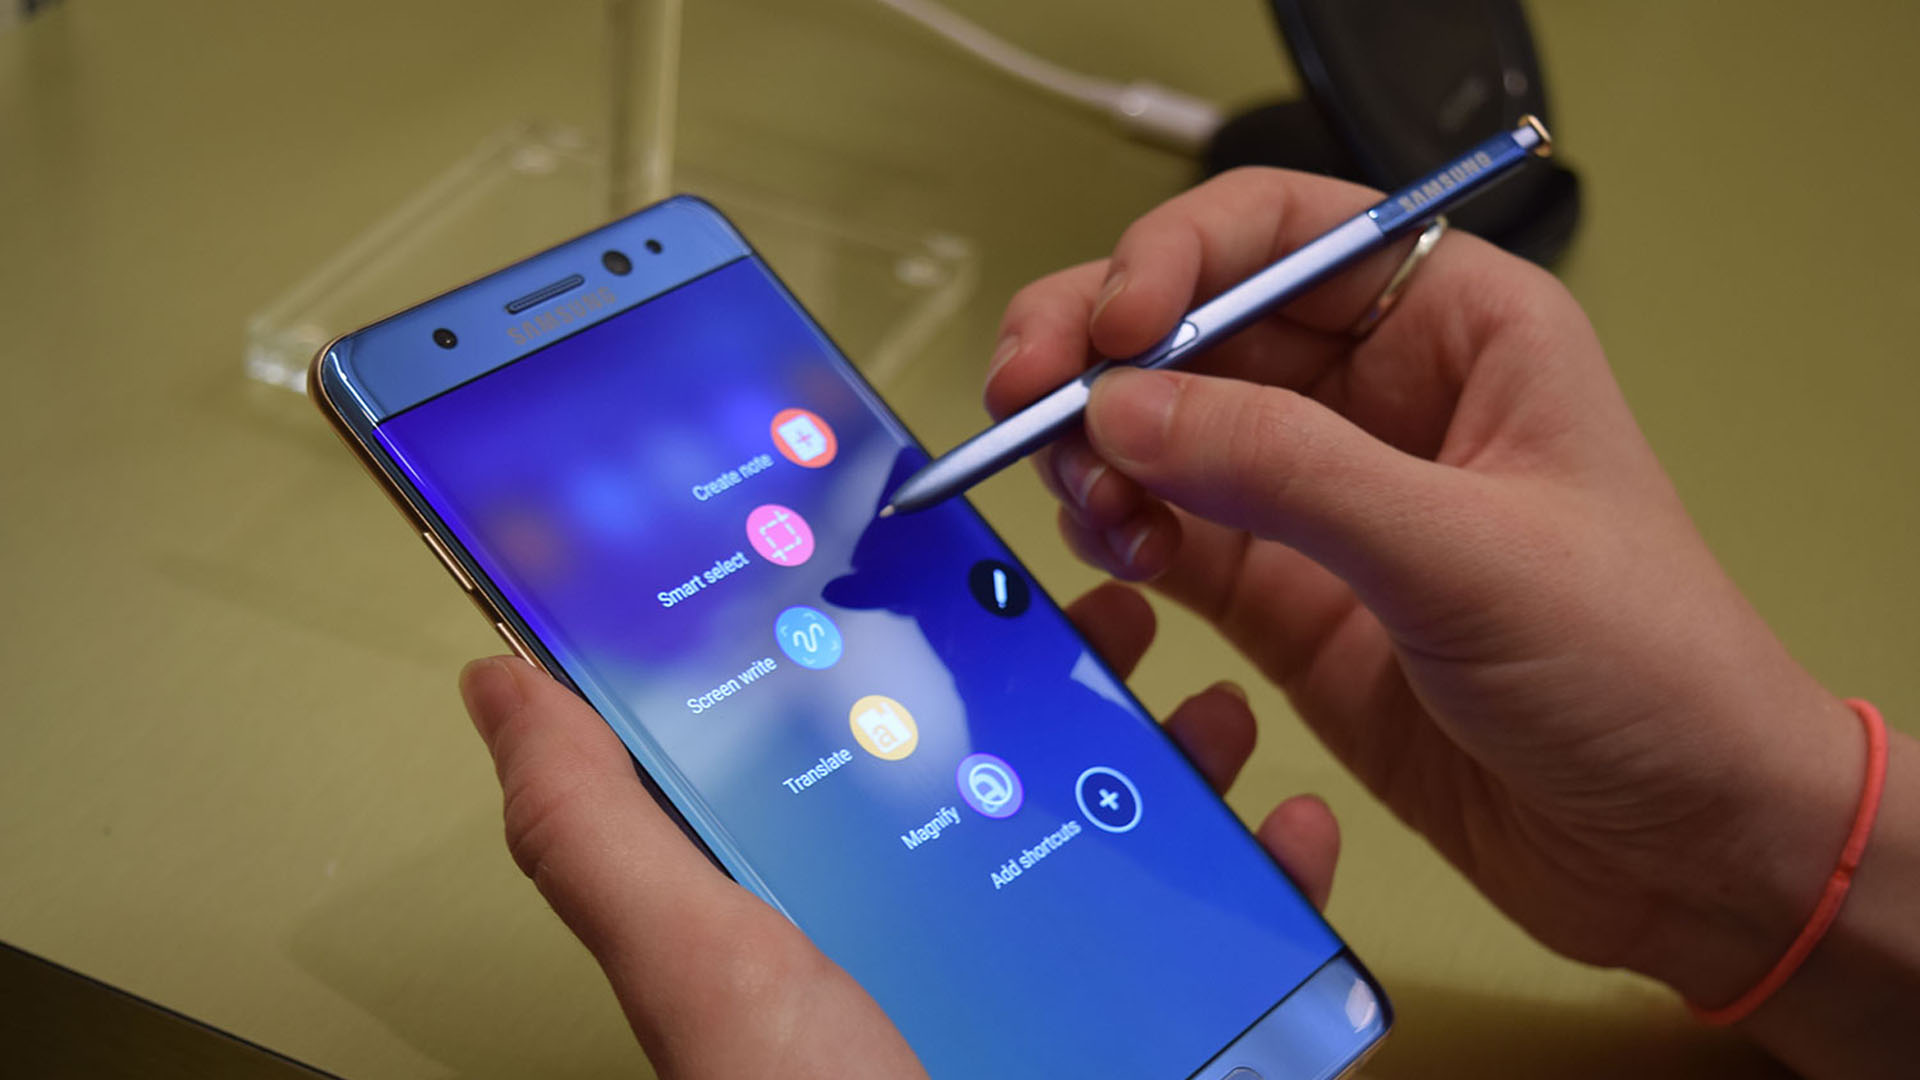 Note 7 note 11. Samsung Note 7. Самсунг галакси ноут 7.